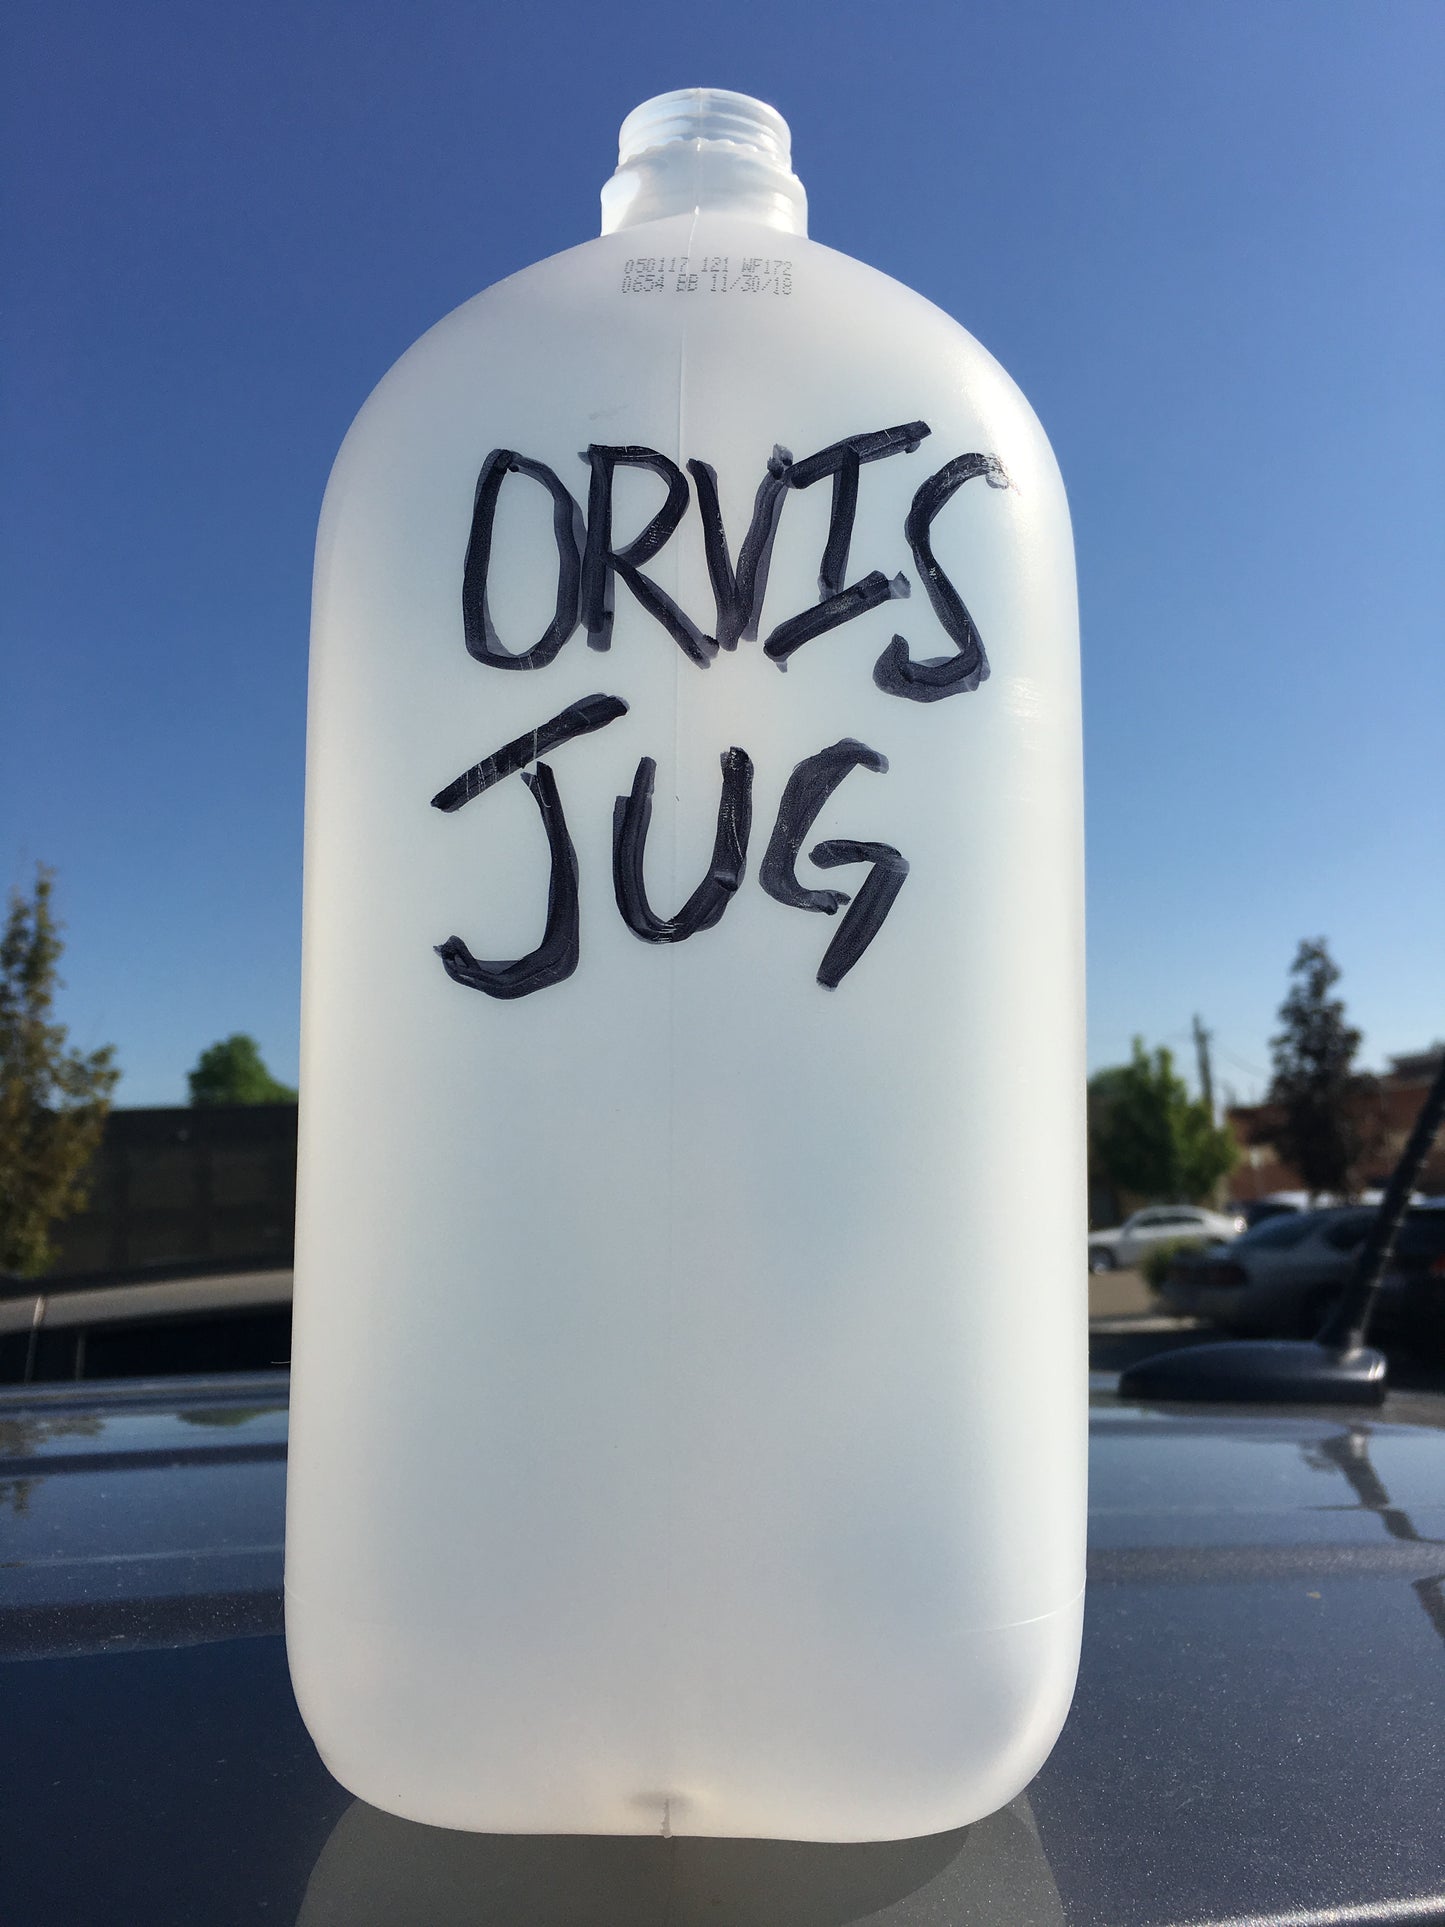 The New Orvis Jug